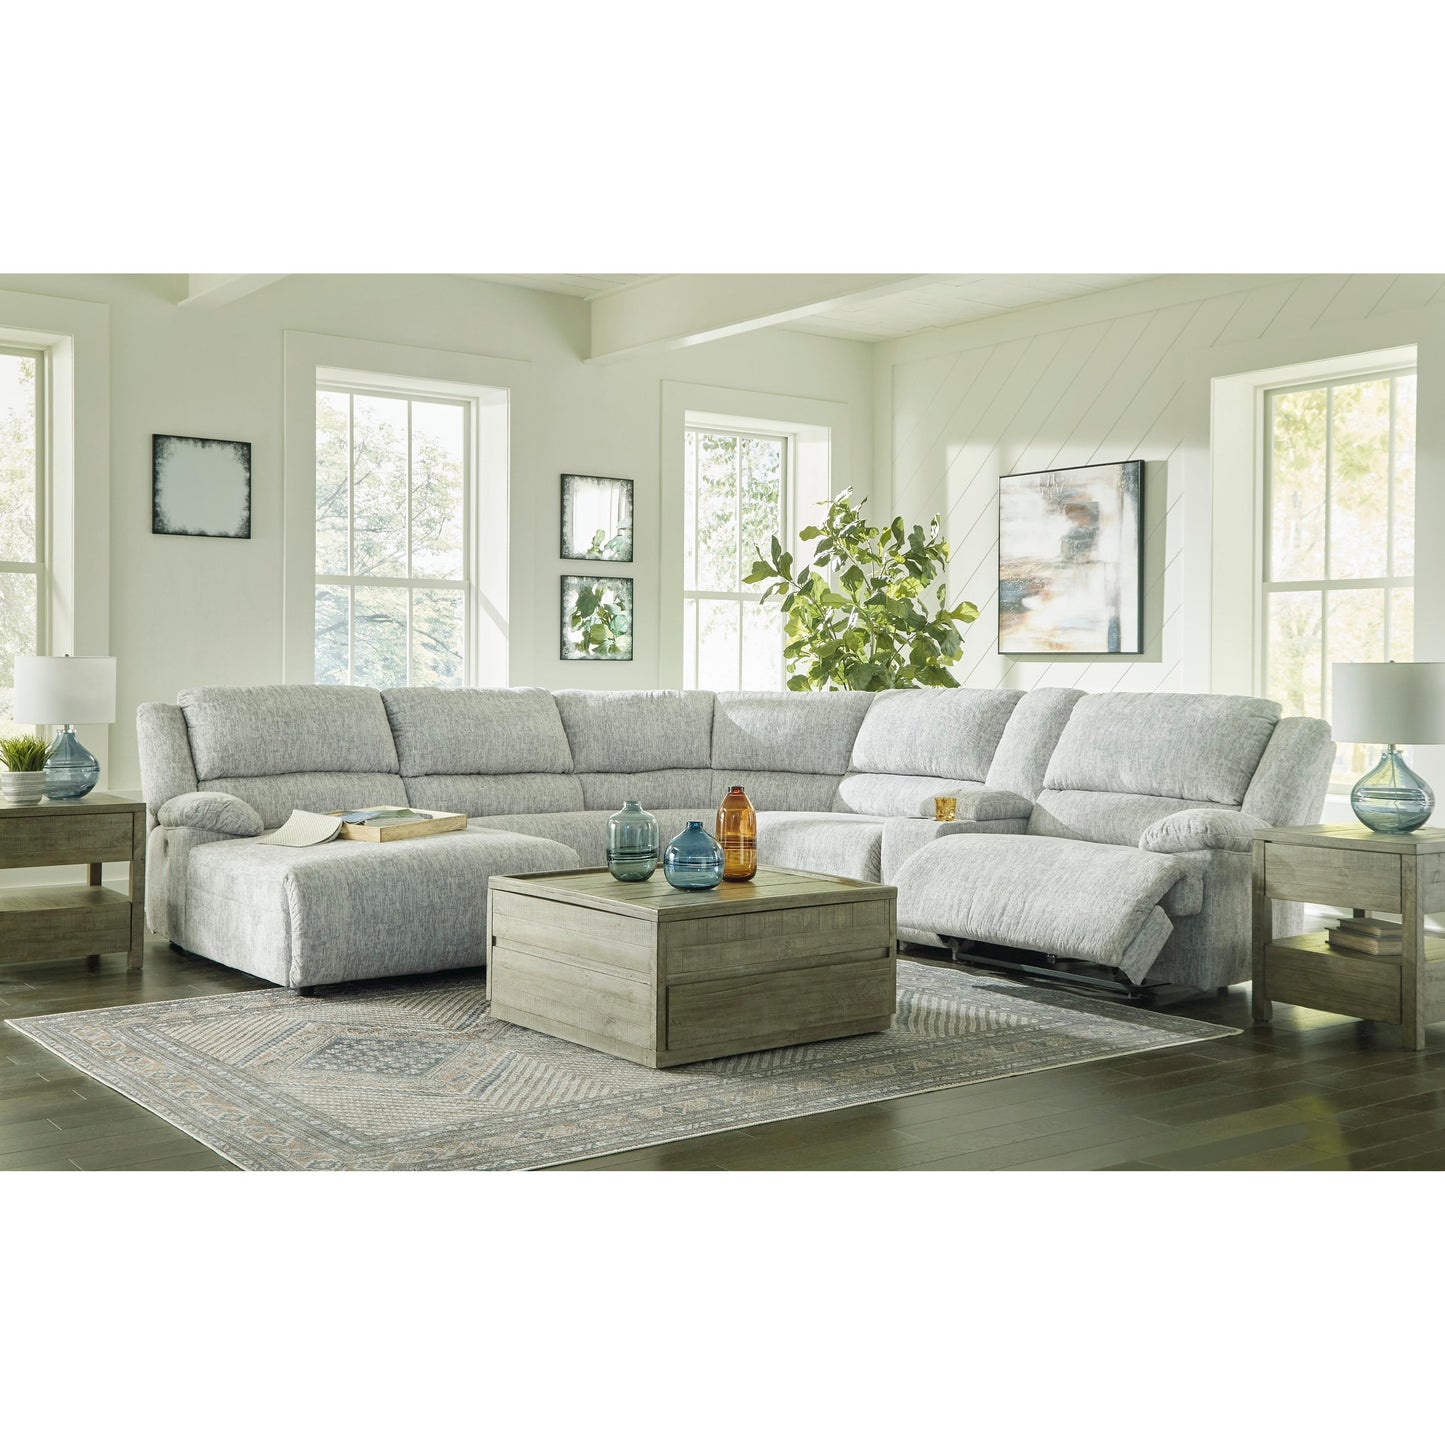 Signature Design by Ashley McClelland Power Reclining Fabric 6 pc Sectional 2930279/2930246/2930277/2930219/2930257/2930262 IMAGE 4